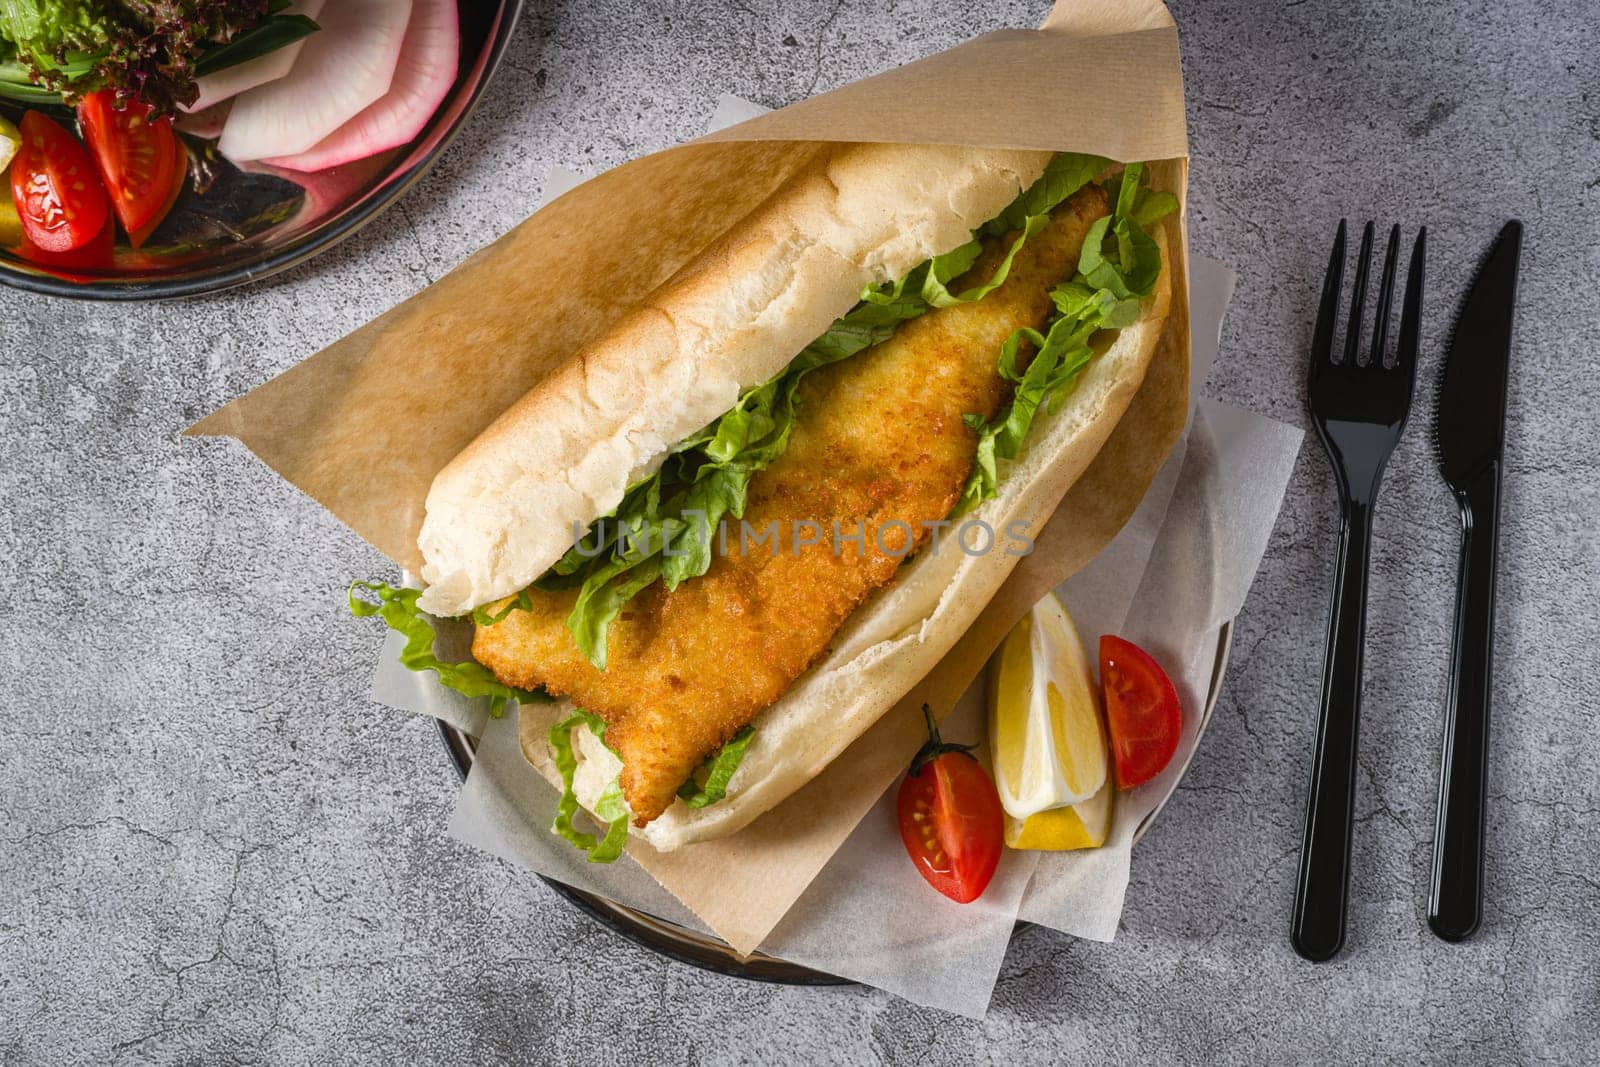 Fried fish sandwich with greens on the stone table. Turkish name Balik Ekmek by Sonat